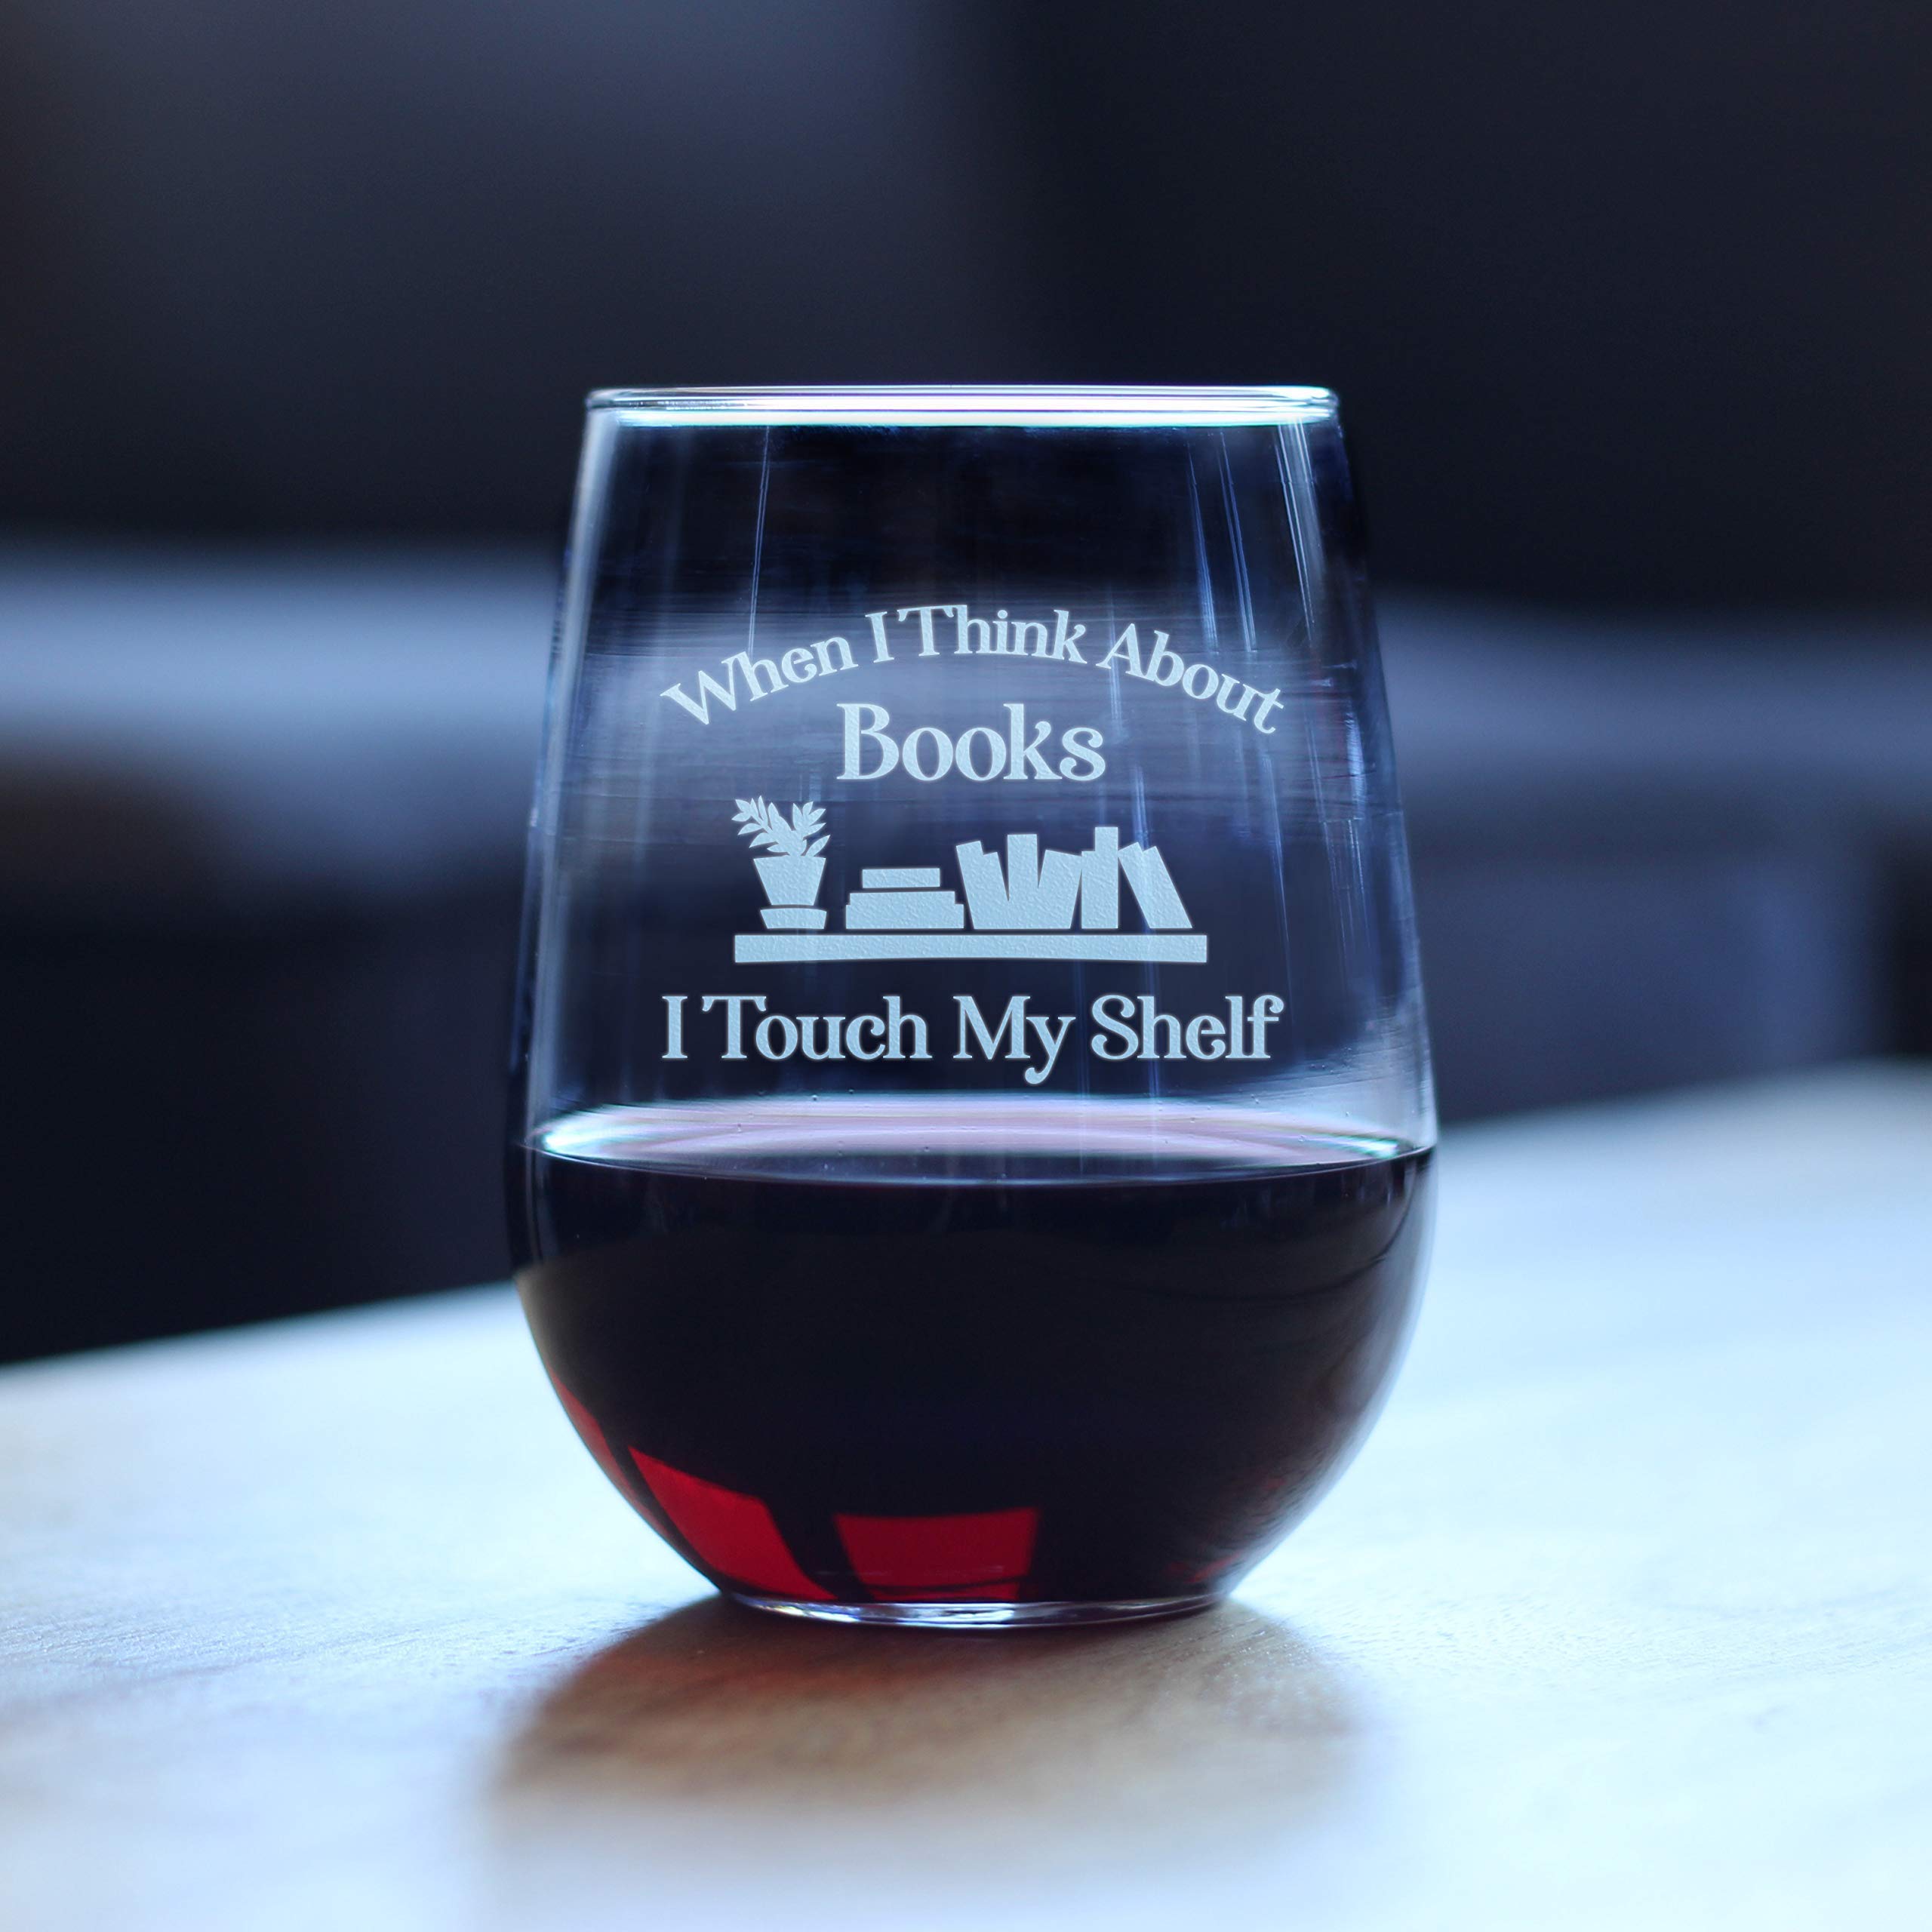 When I Think About Books I Touch My Shelf - Stemless Wine Glass - Funny Gifts for Book Club Lovers and Readers - Large 17 Ounce